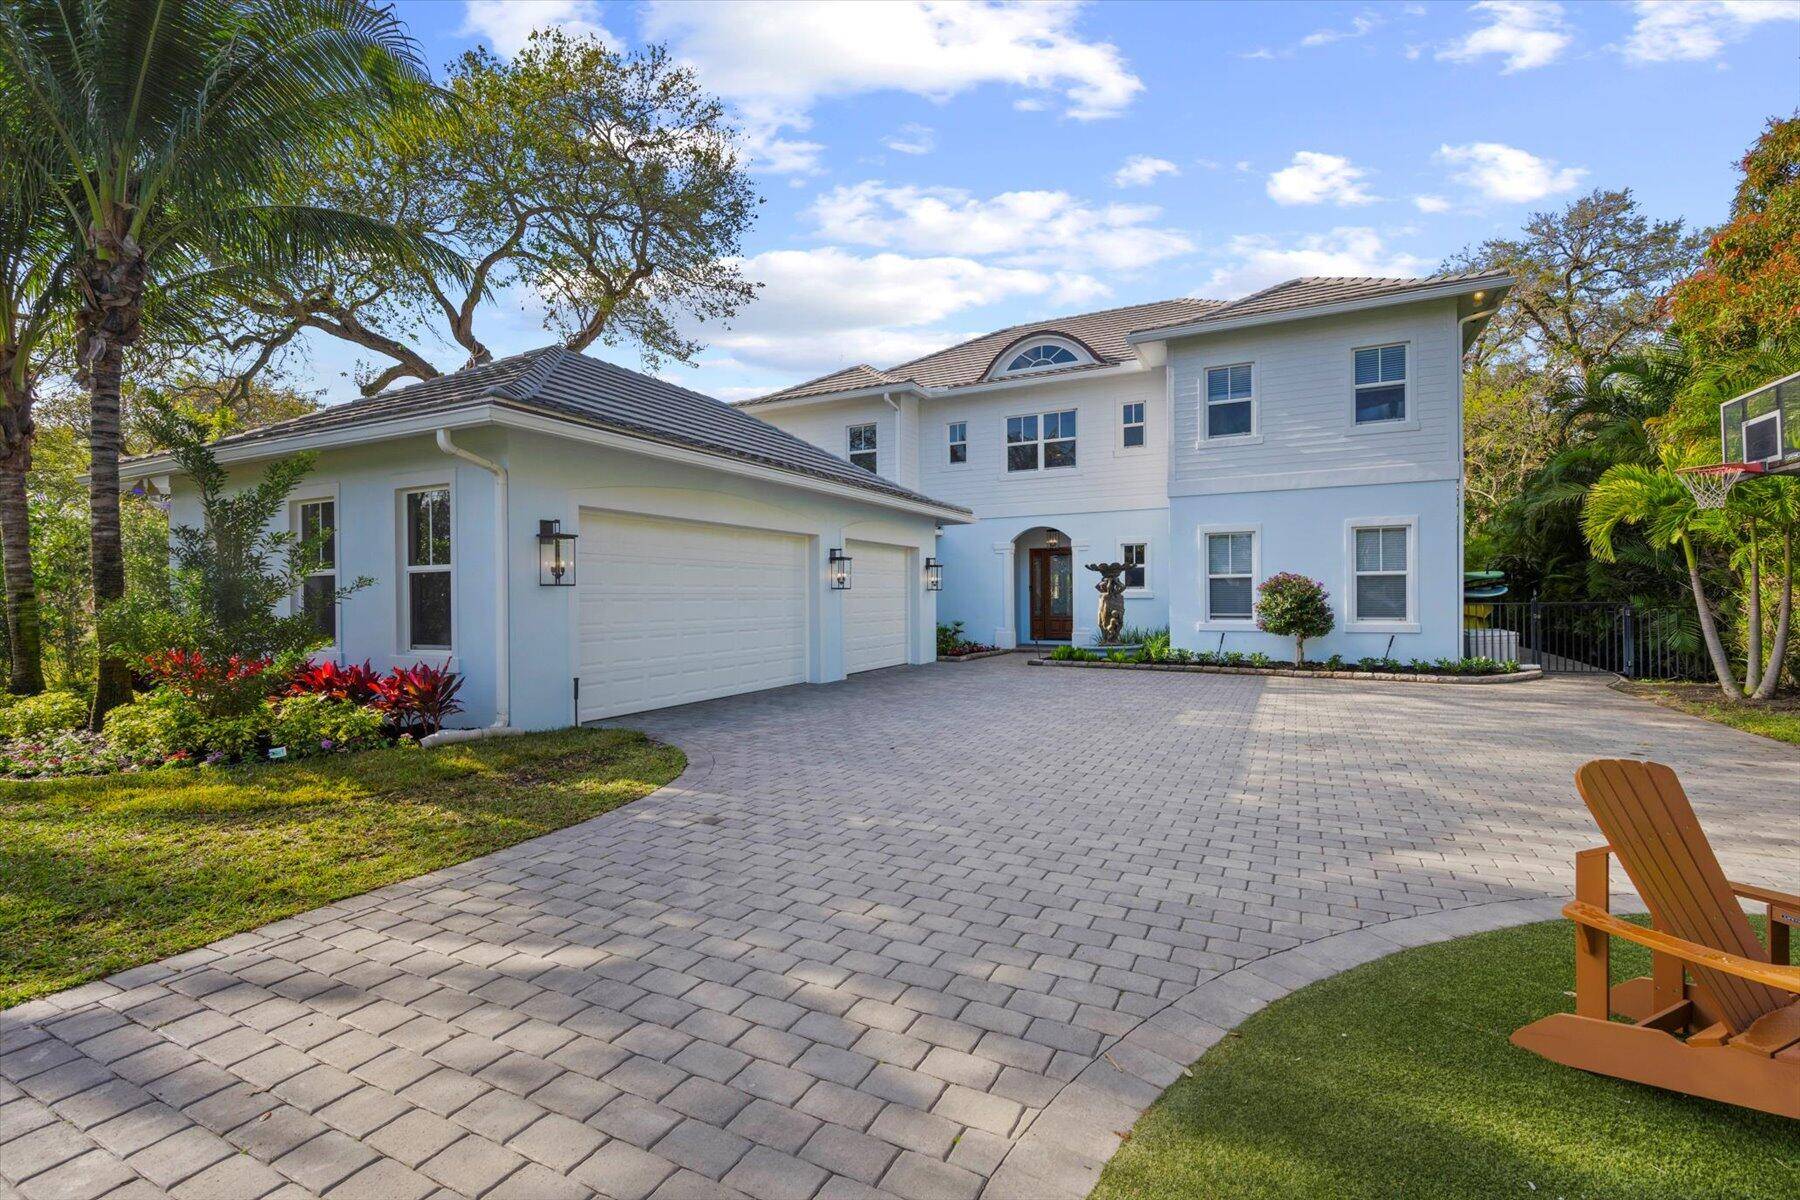 Don't miss this newer 2016 built Anglo Caribbean direct riverfront home on oversized.